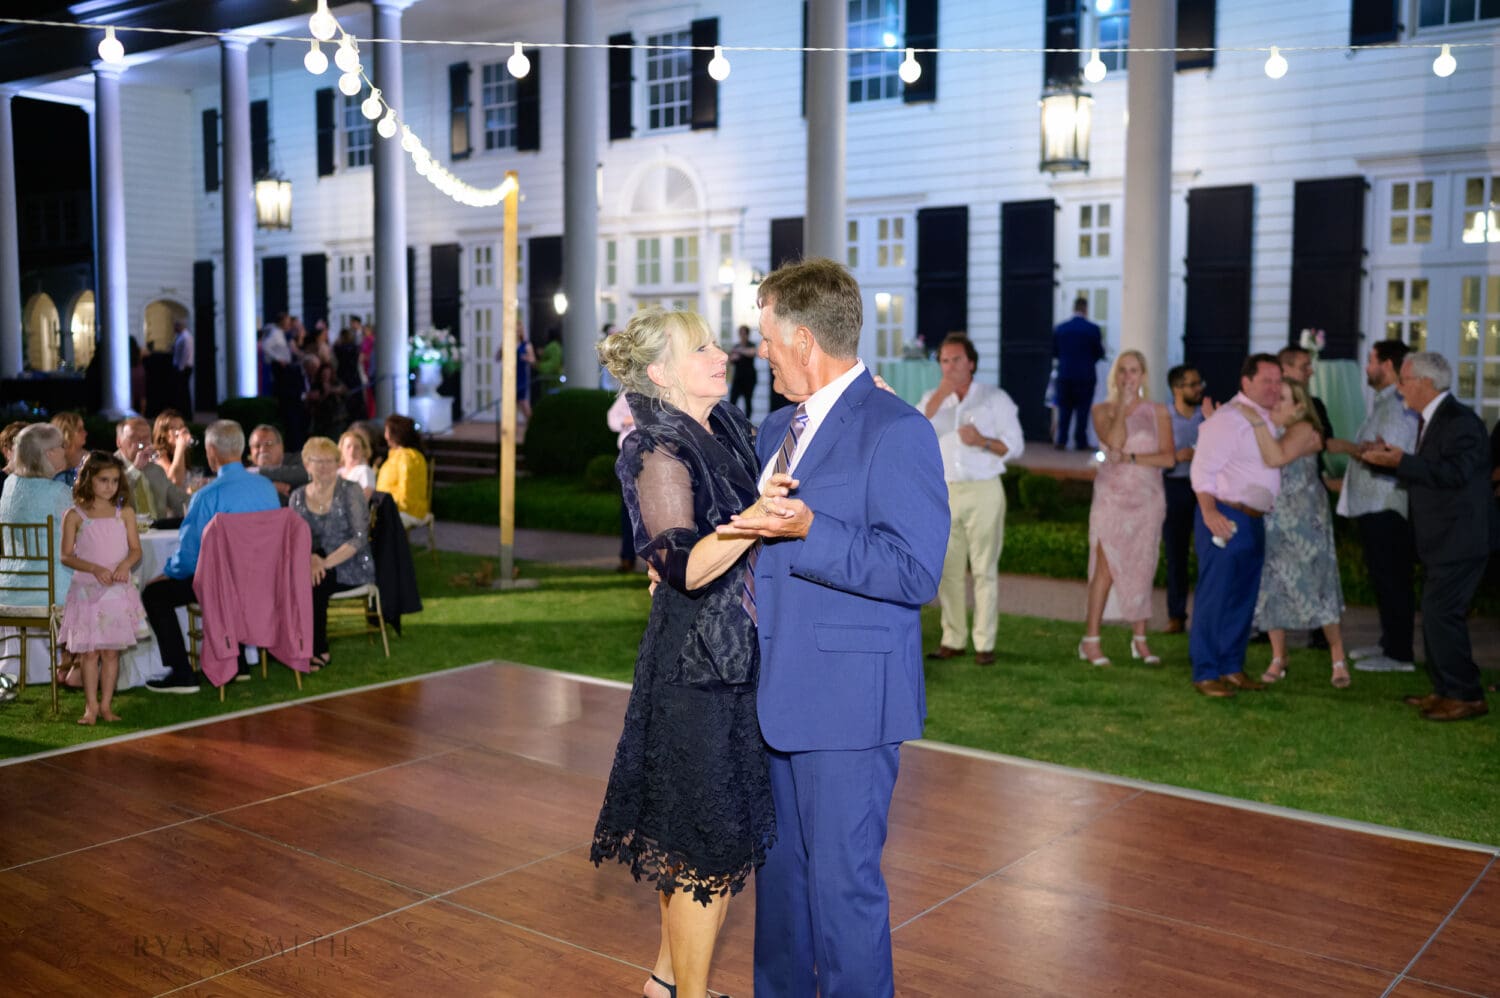 Parent's dancing - Pine Lakes Country Club